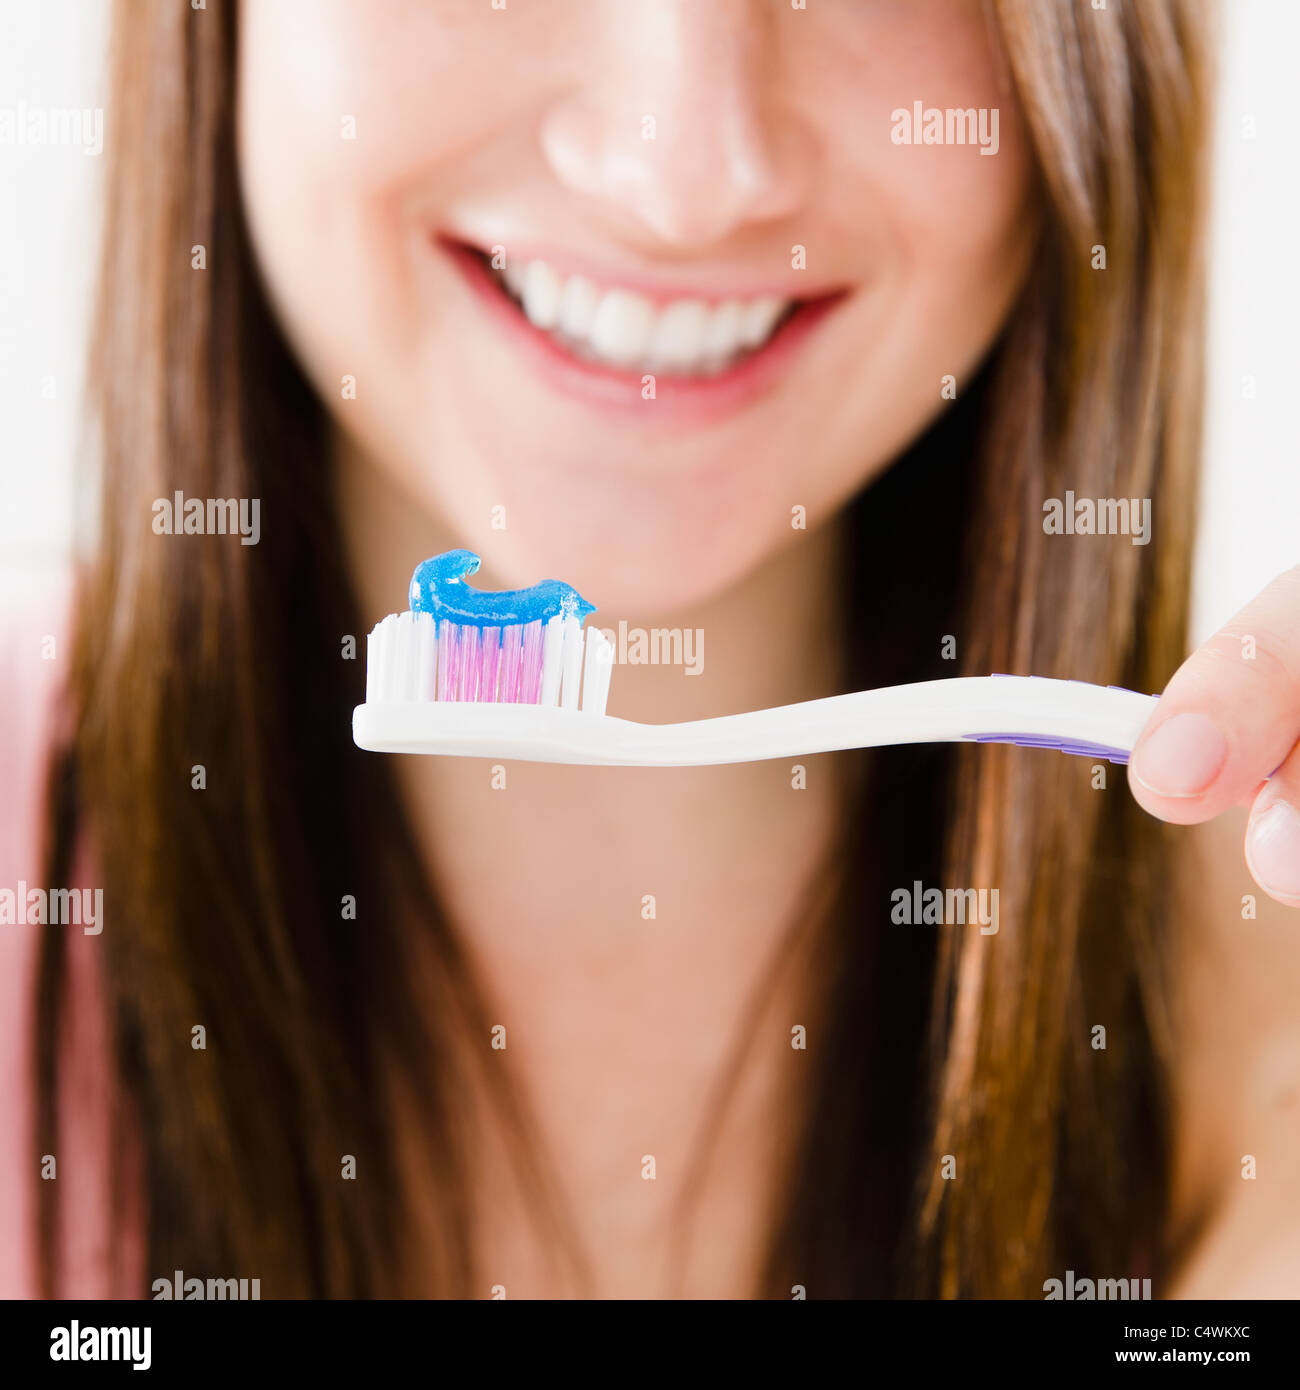 Close-up of smiling young woman holding toothbrush Banque D'Images